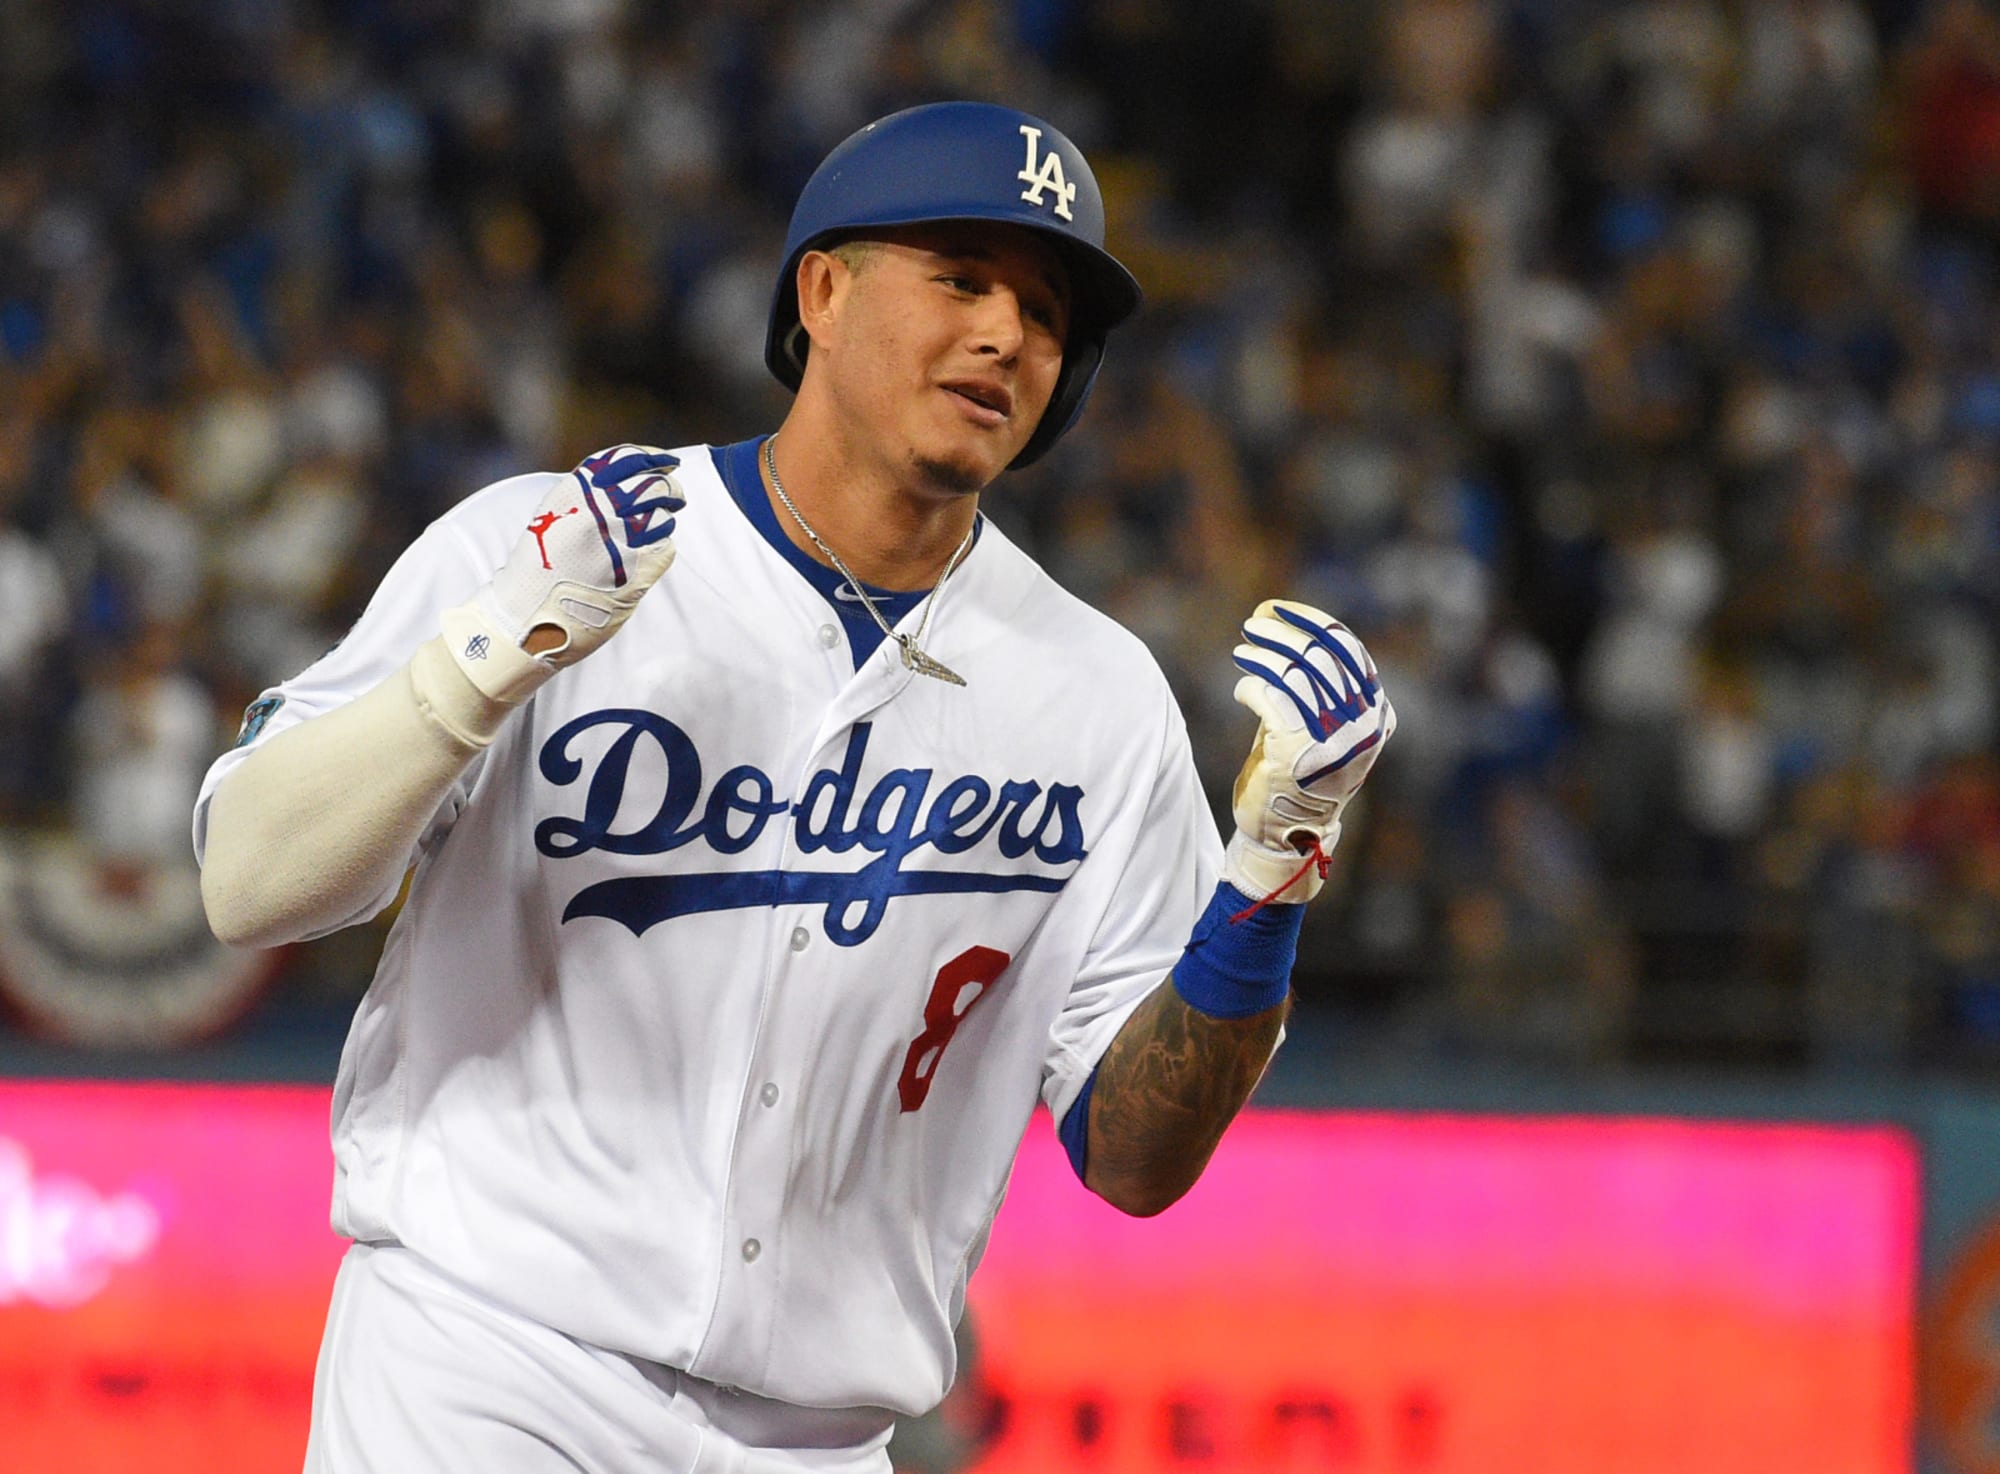 Manny Machado jerseys got pulled from Padres team store